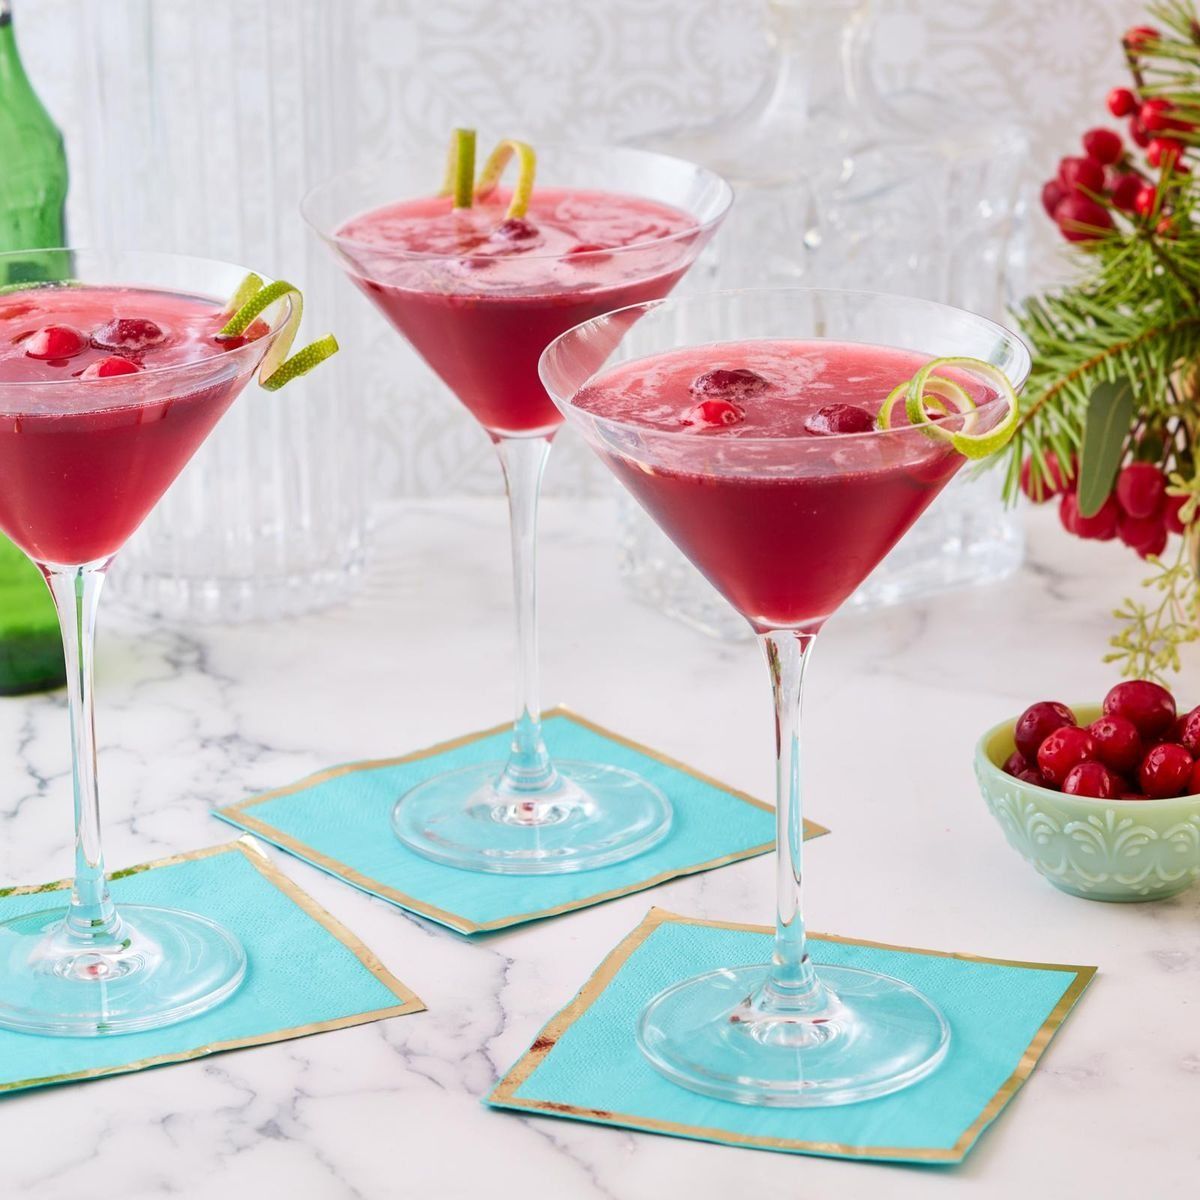 https://hips.hearstapps.com/hmg-prod/images/new-years-eve-drinks-recipes-cranberry-martini-65368cc76675c.jpeg